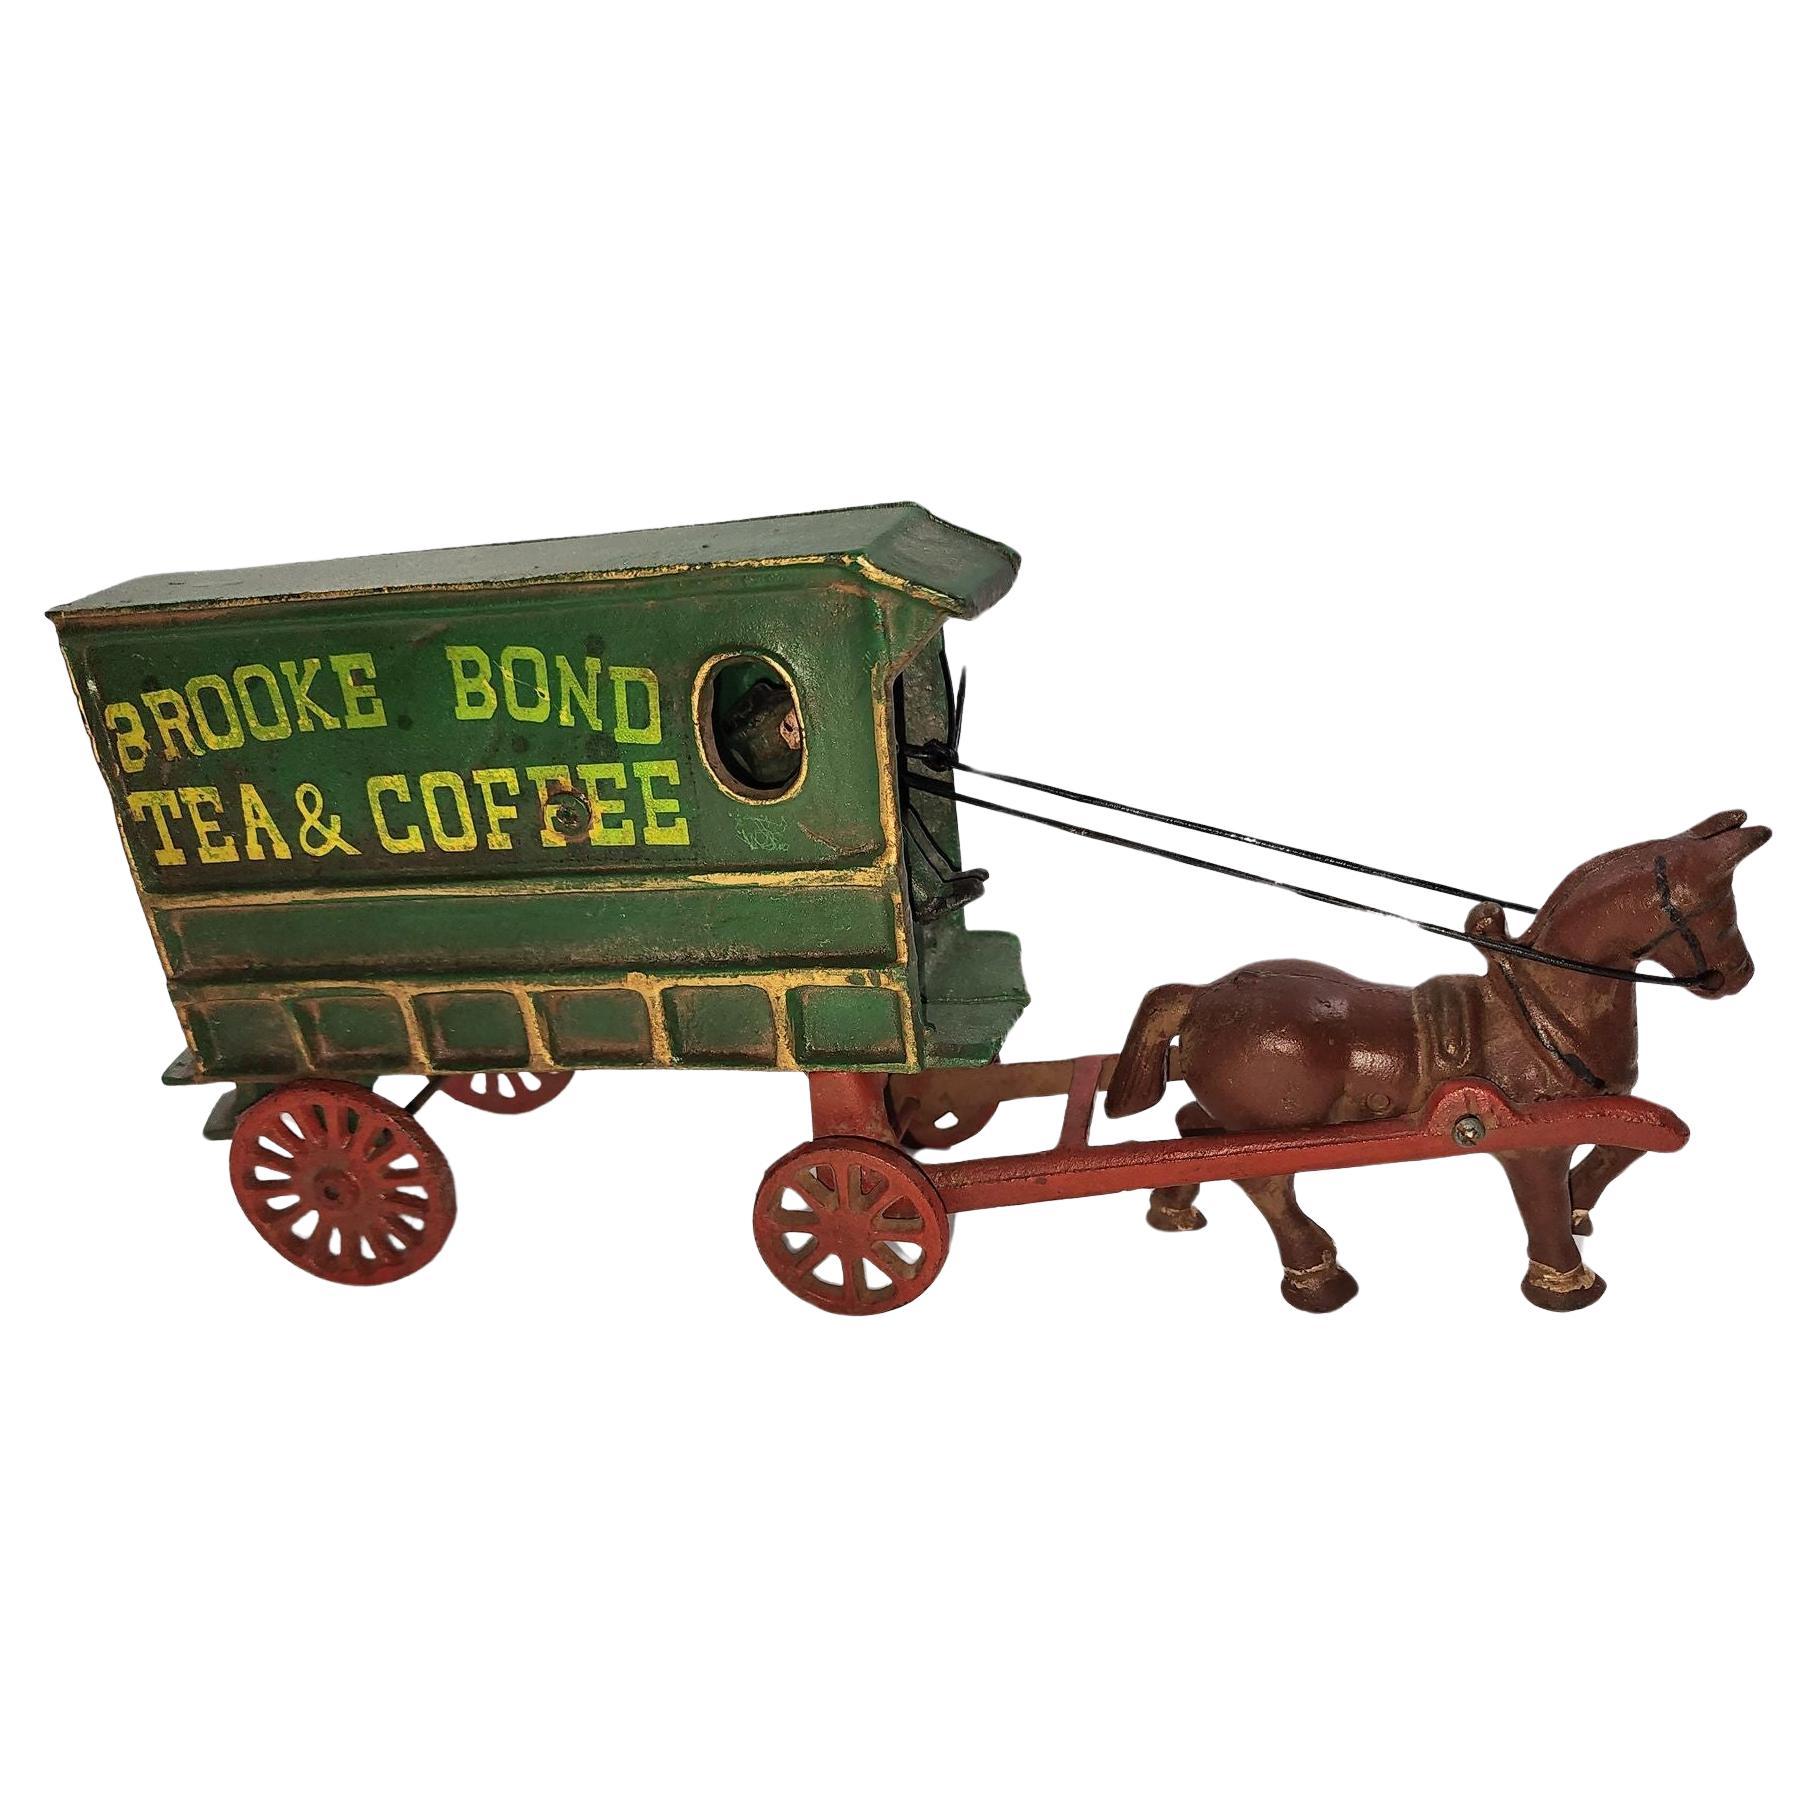 Vintage Brooke Bond Tea and Coffee Cast Iron Horse and Wagon with Driver